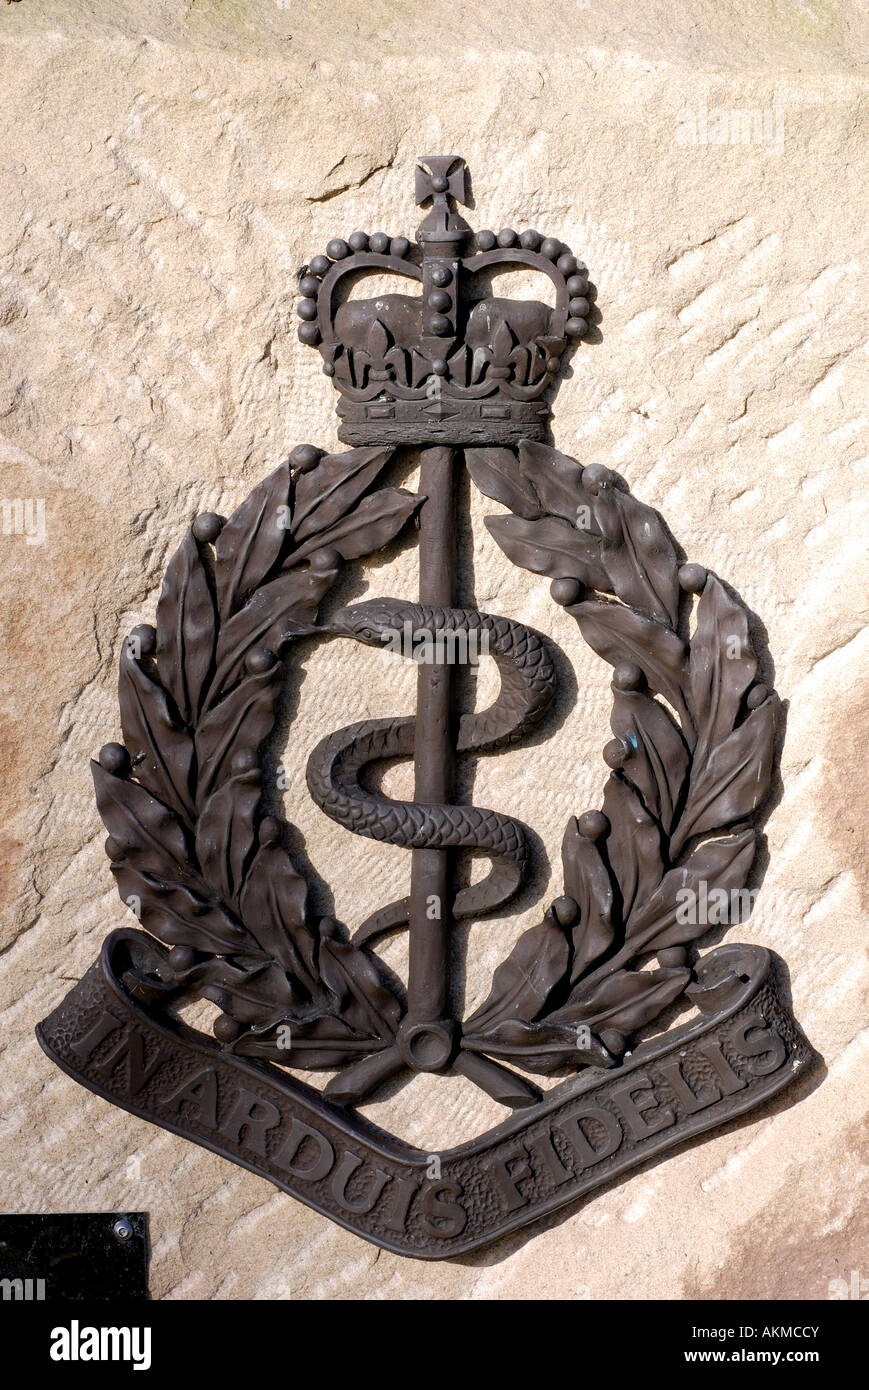 Insignia on Royal Army Medical Corps Memorial at National Memorial Arboretum, Staffordshire, England, UK Stock Photo